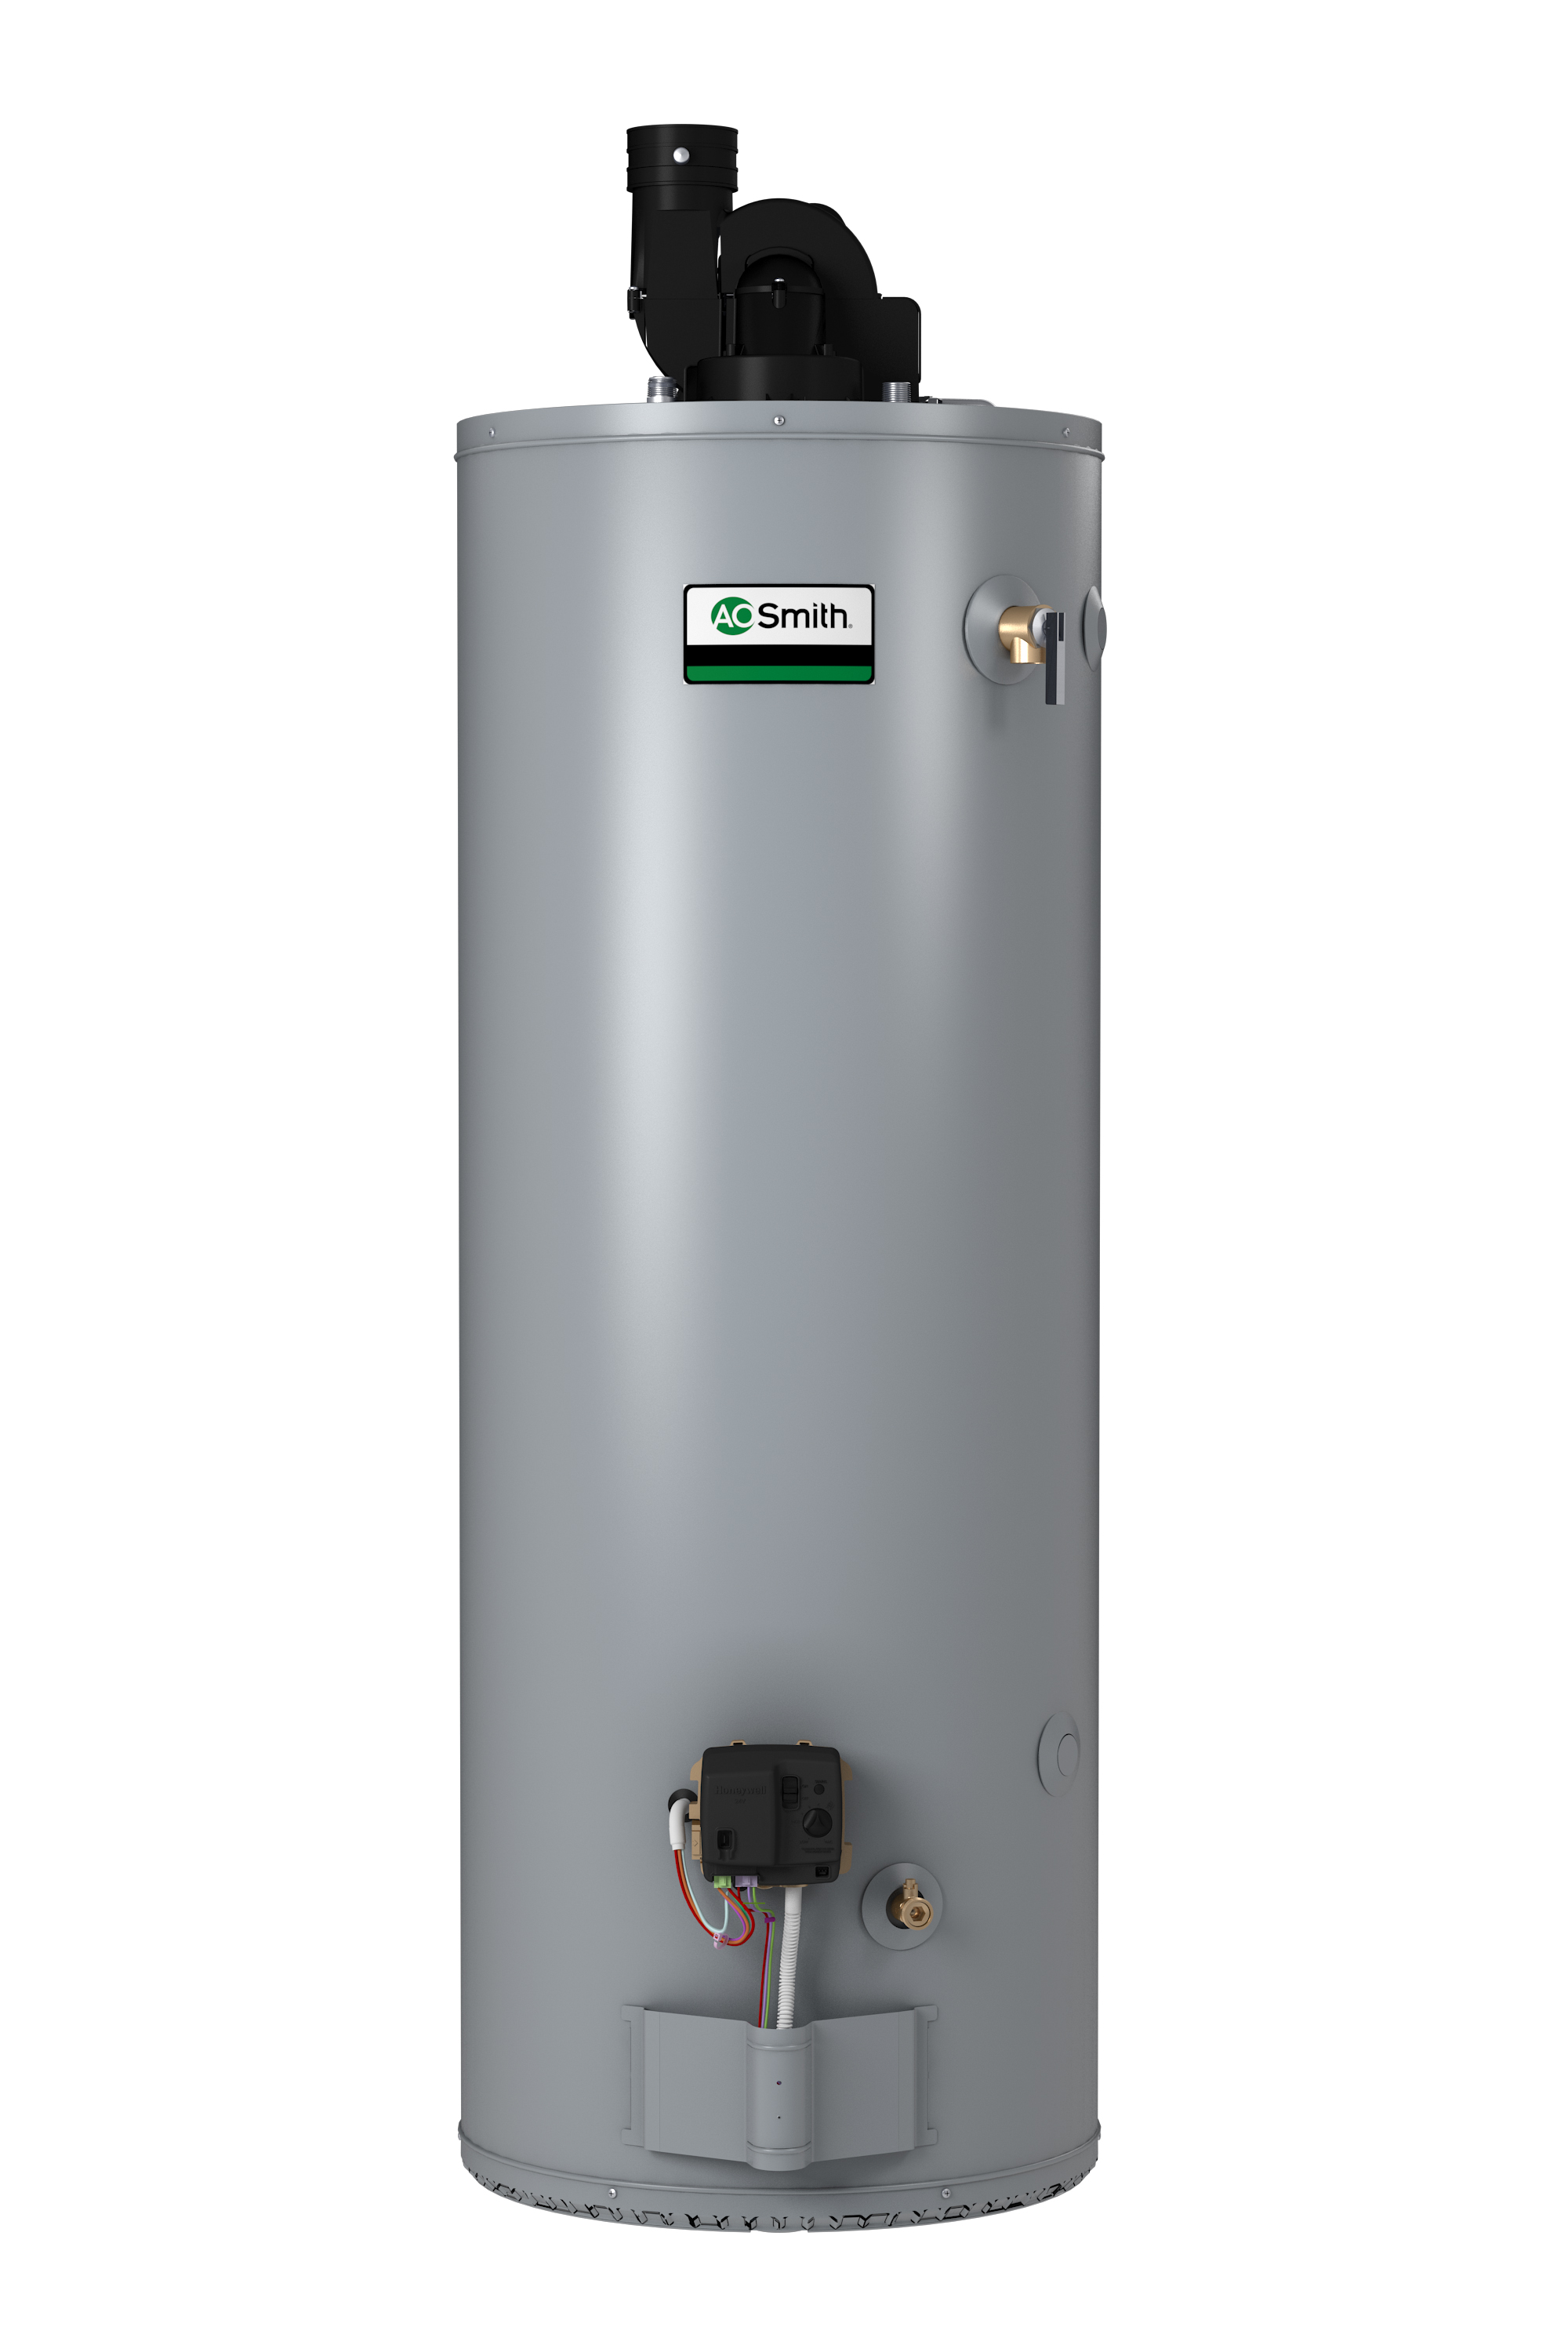 AO SMITH BPD-80: 75 GALLON, 76,000 BTU, 3" OR 4" VENT, CONSERVATIONIST POWER DIRECT VENT, SINGLE FLUE, NATURAL GAS COMMERICAL WATER HEATER, GOOD TO 10,100' ALTITUDE